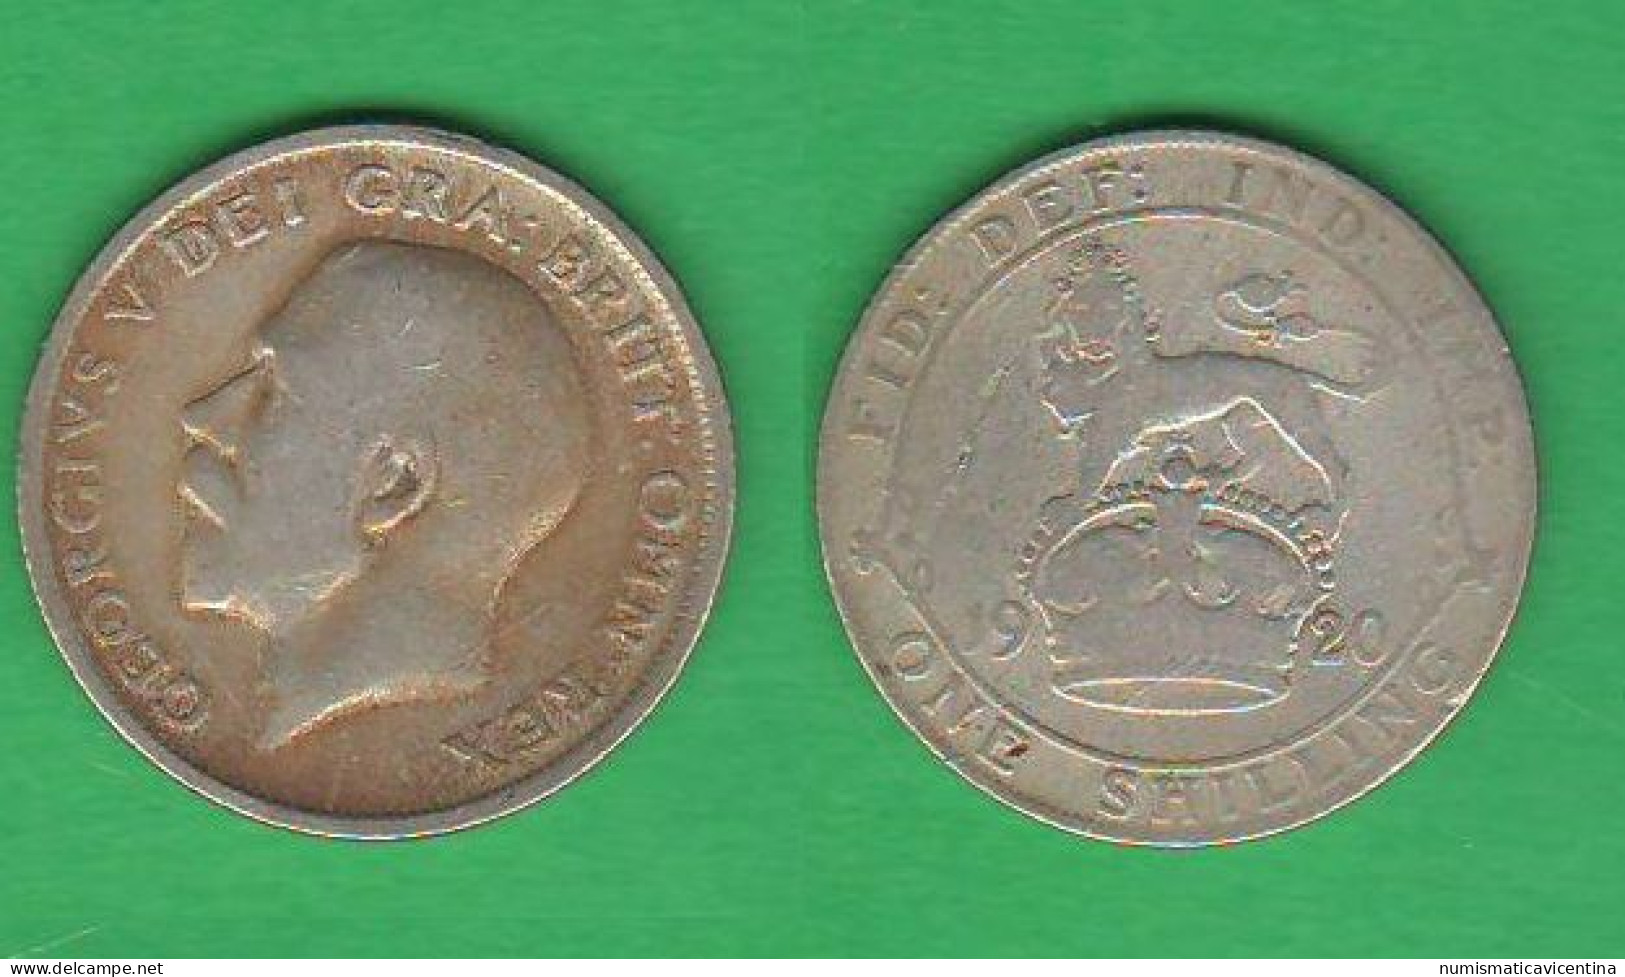 Inghilterra One Schilling 1920 Great Britain Angleterre King Georgius V° Silver Coin - I. 1 Shilling